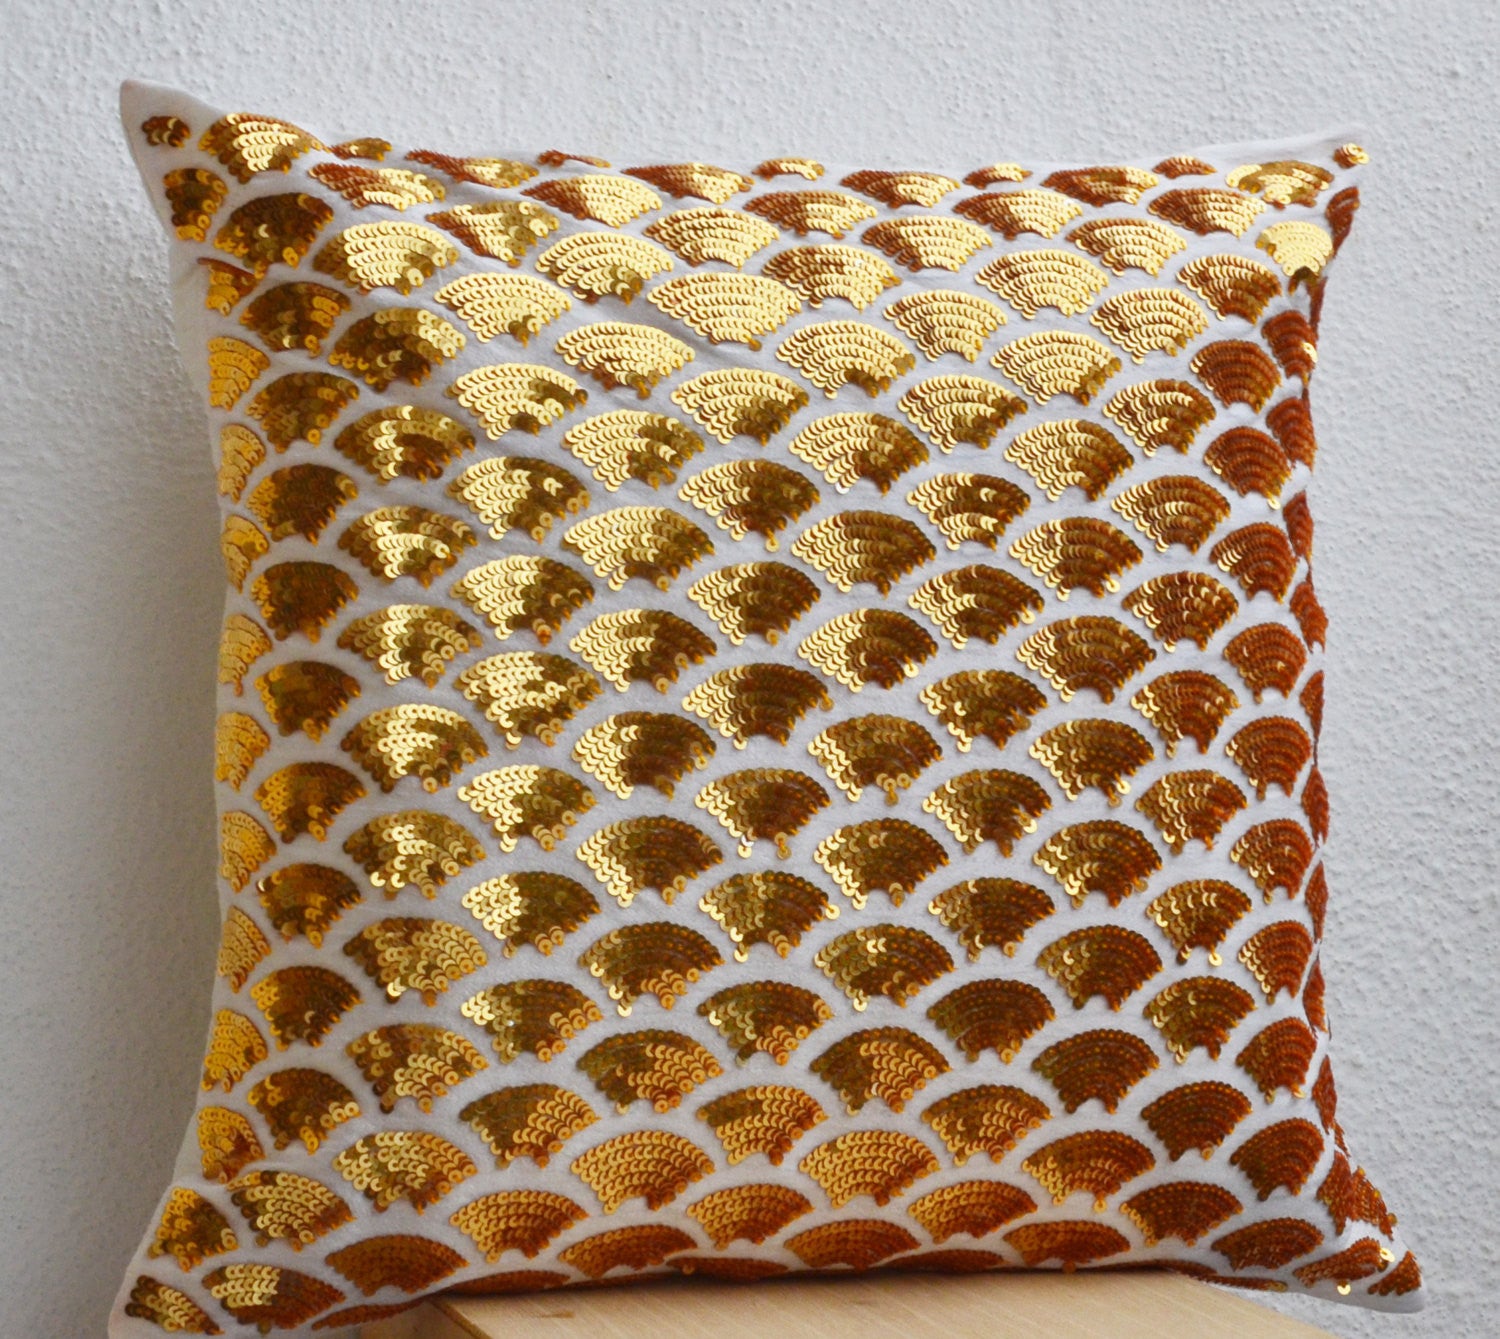 Handmade gold sequin pillows with embroidery